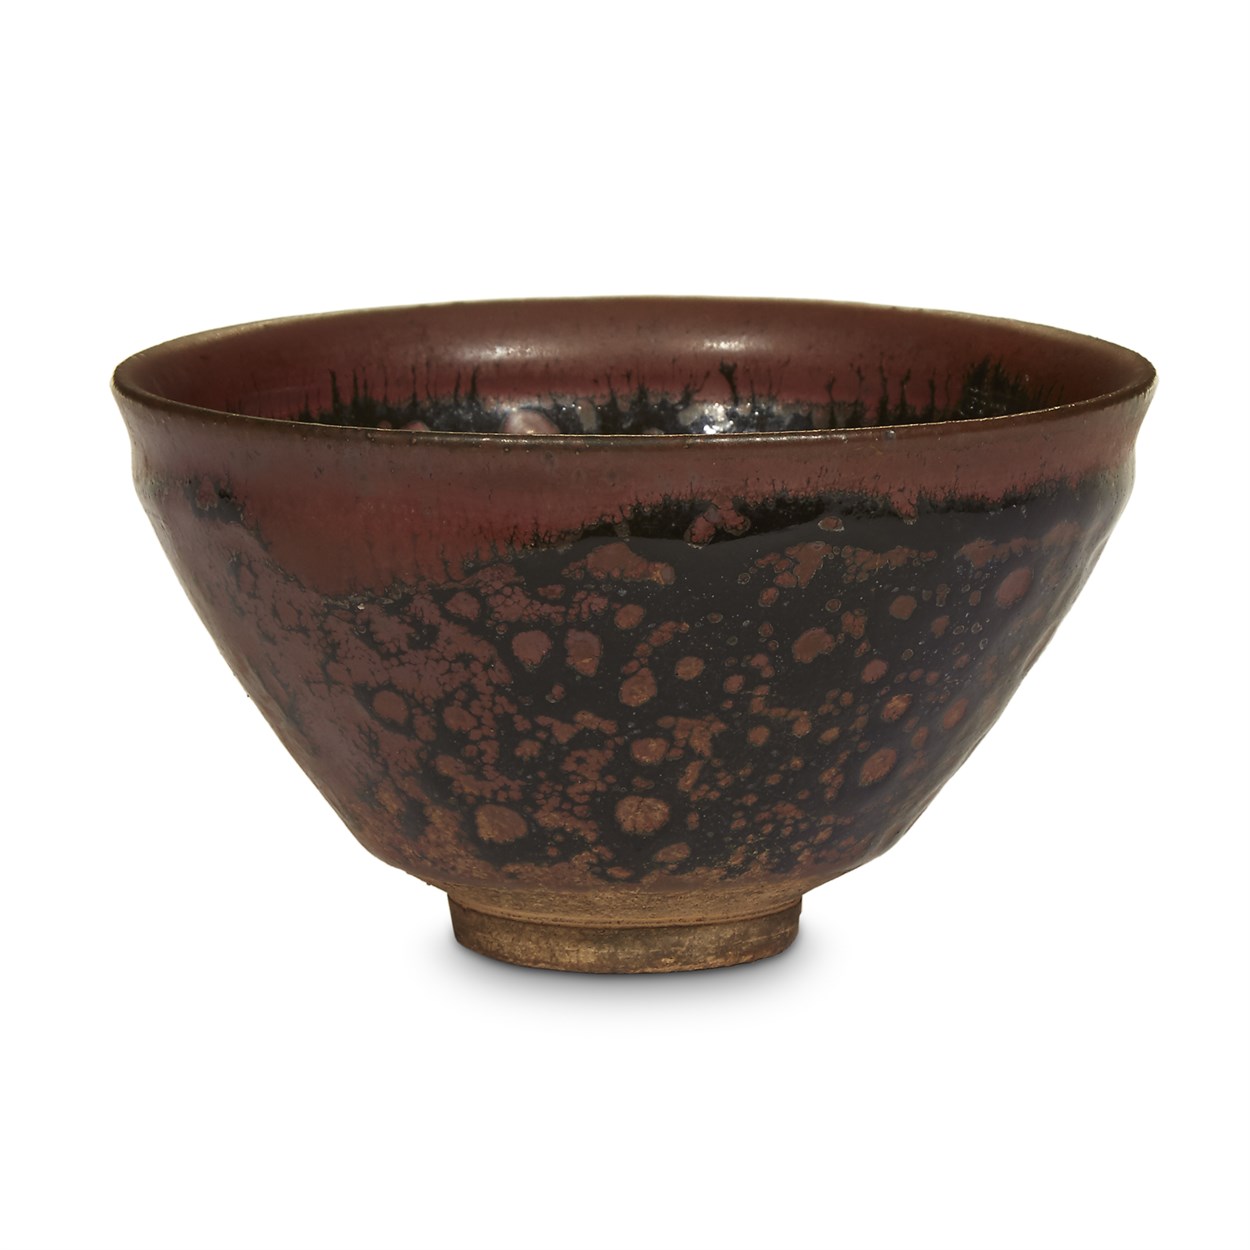 Lot 41 - A Chinese Jian-type mottled brown and black-glazed teabowl